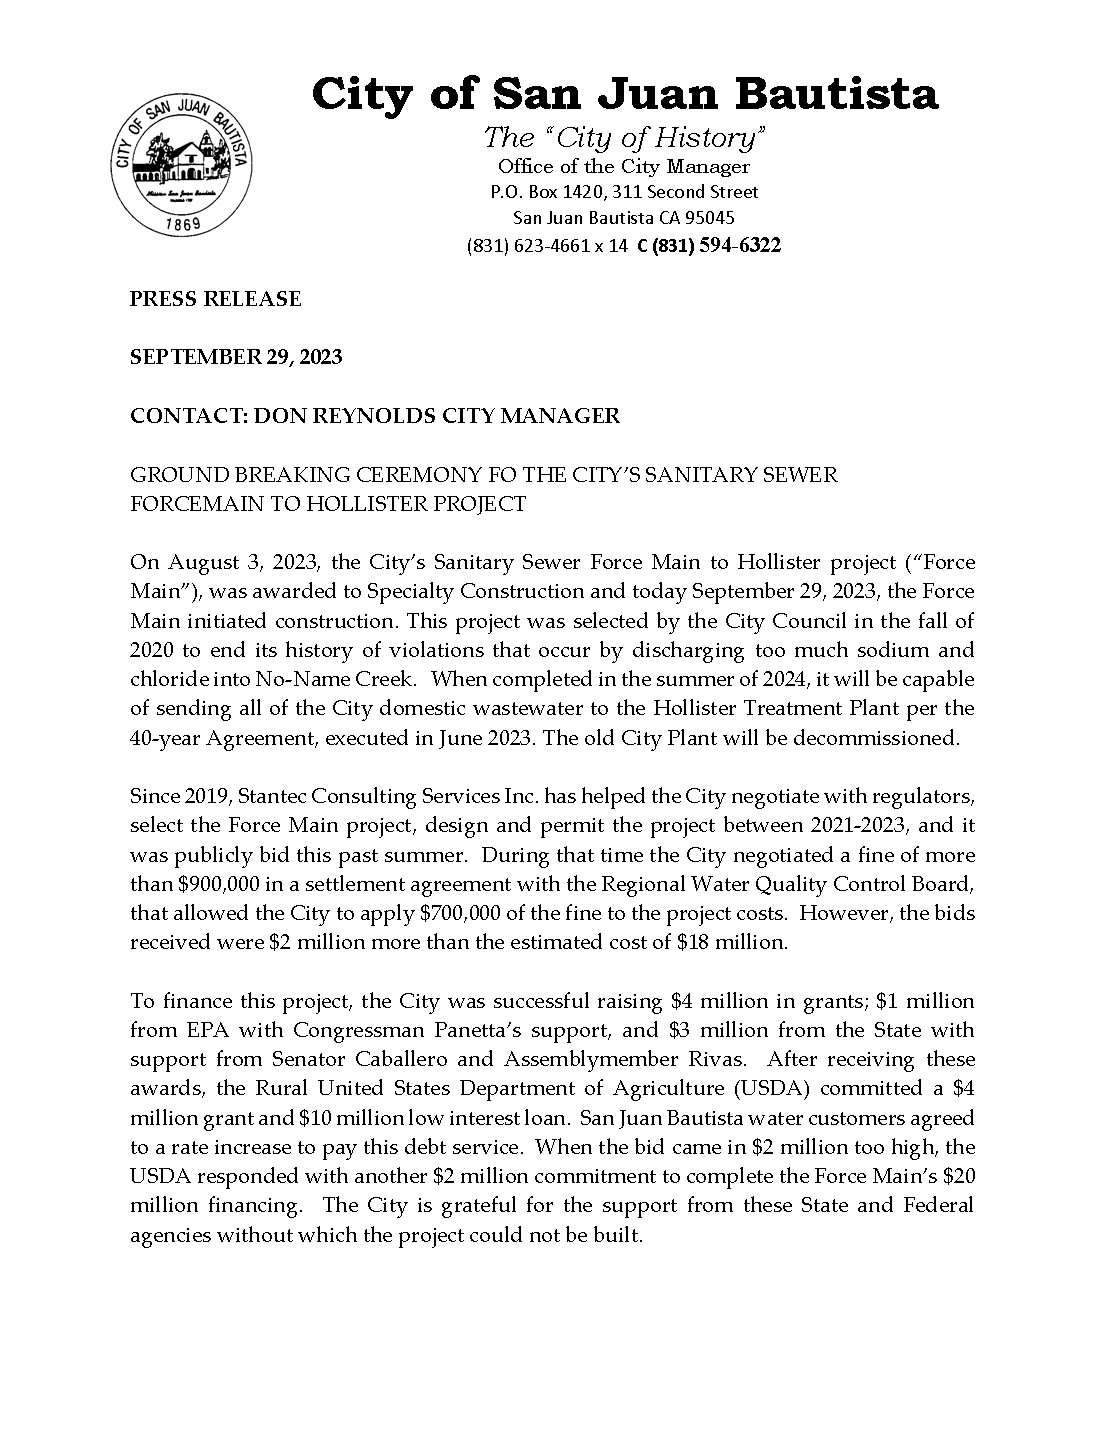 Press Release Force Main 09.29.23 (002)_Page_1